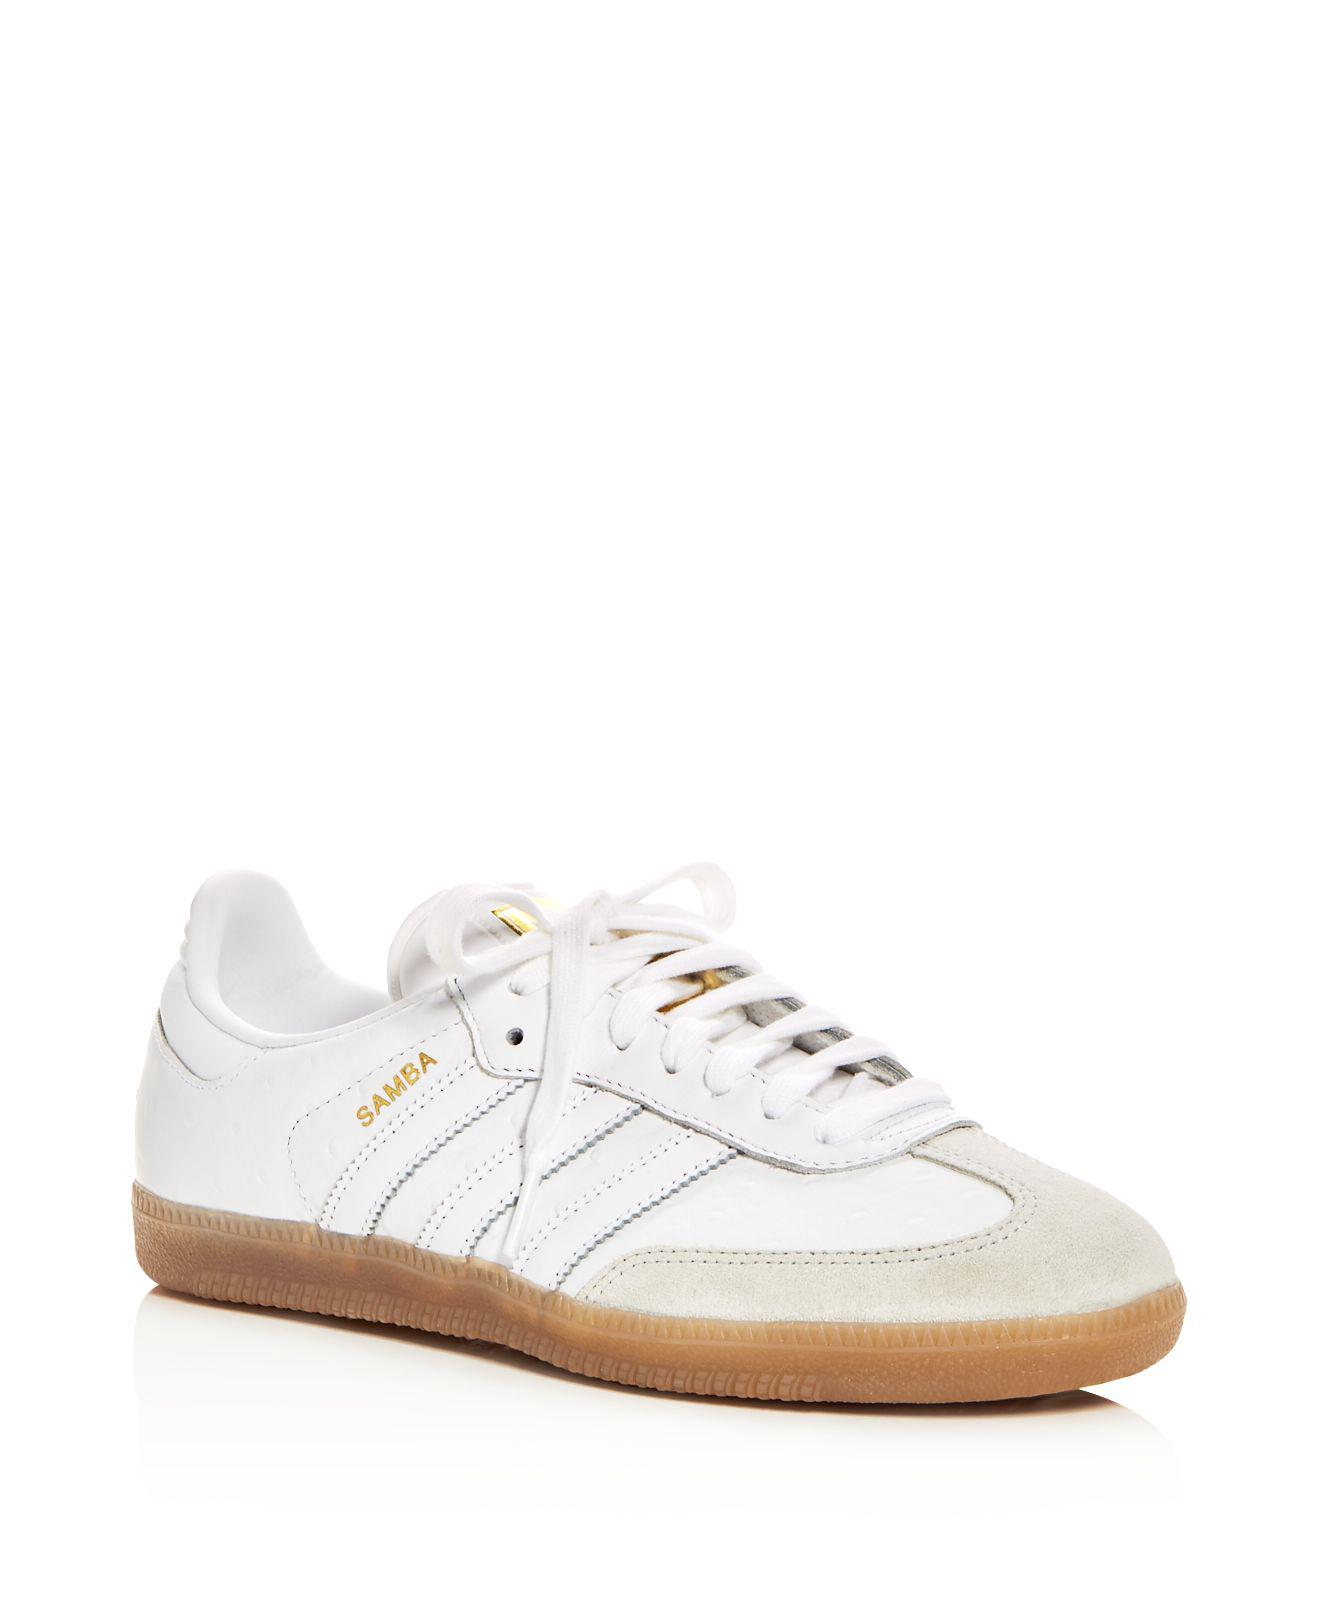 adidas Women's Samba Leather Lace Up Sneakers in White/Gold Metallic (White)  - Lyst